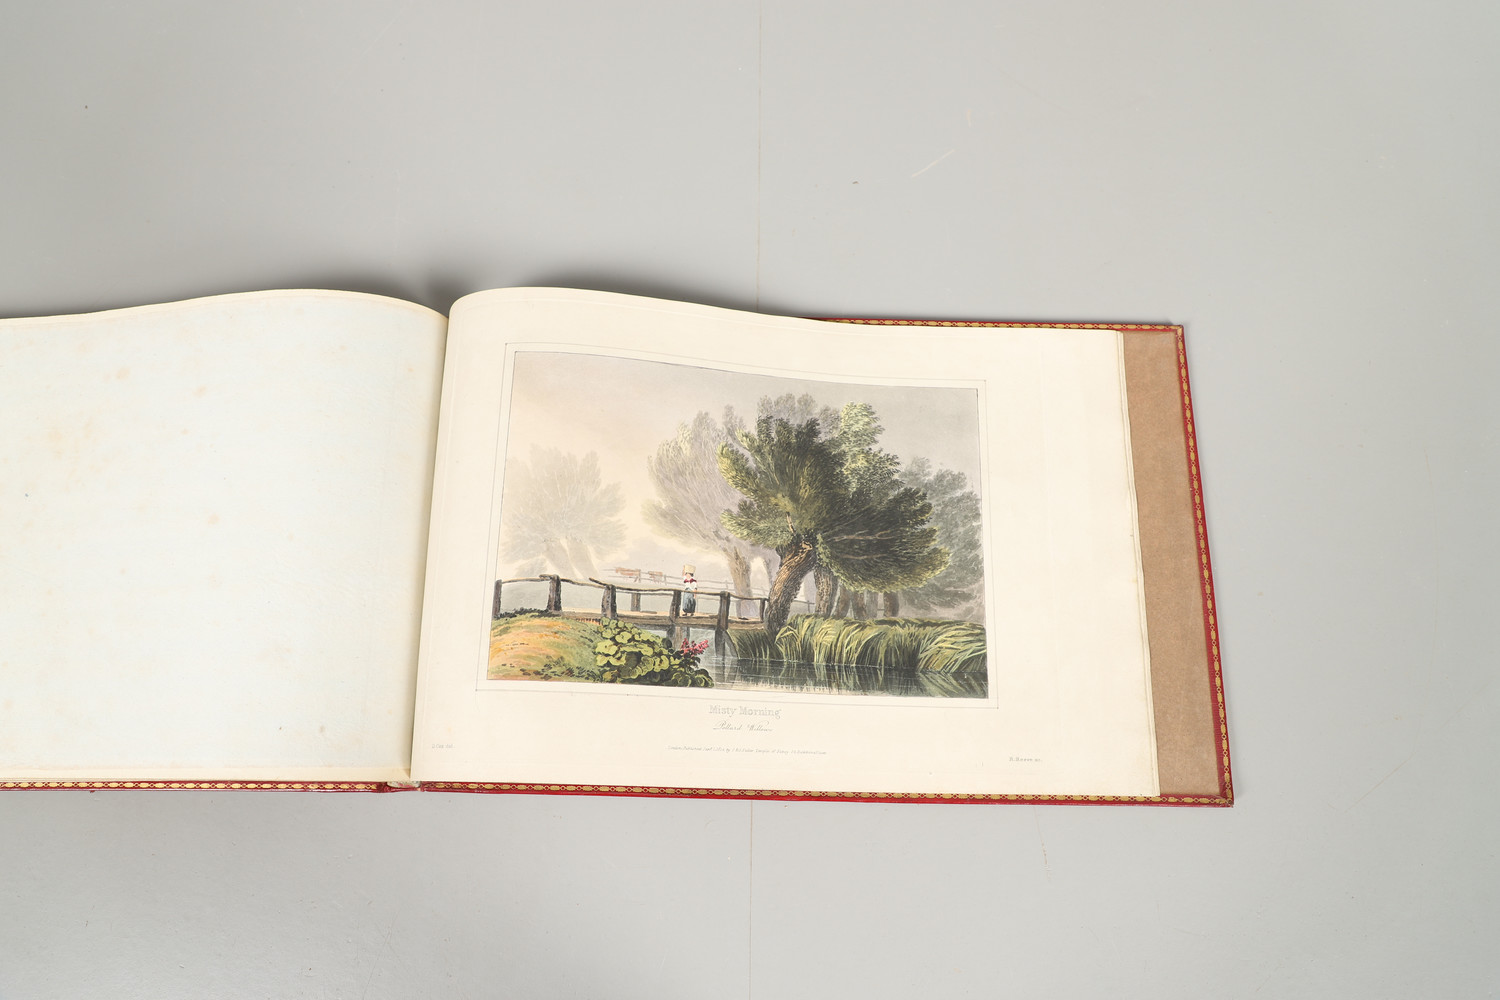 DAVID COX. A Treatise on Landscape Painting, 1814. - Image 7 of 9